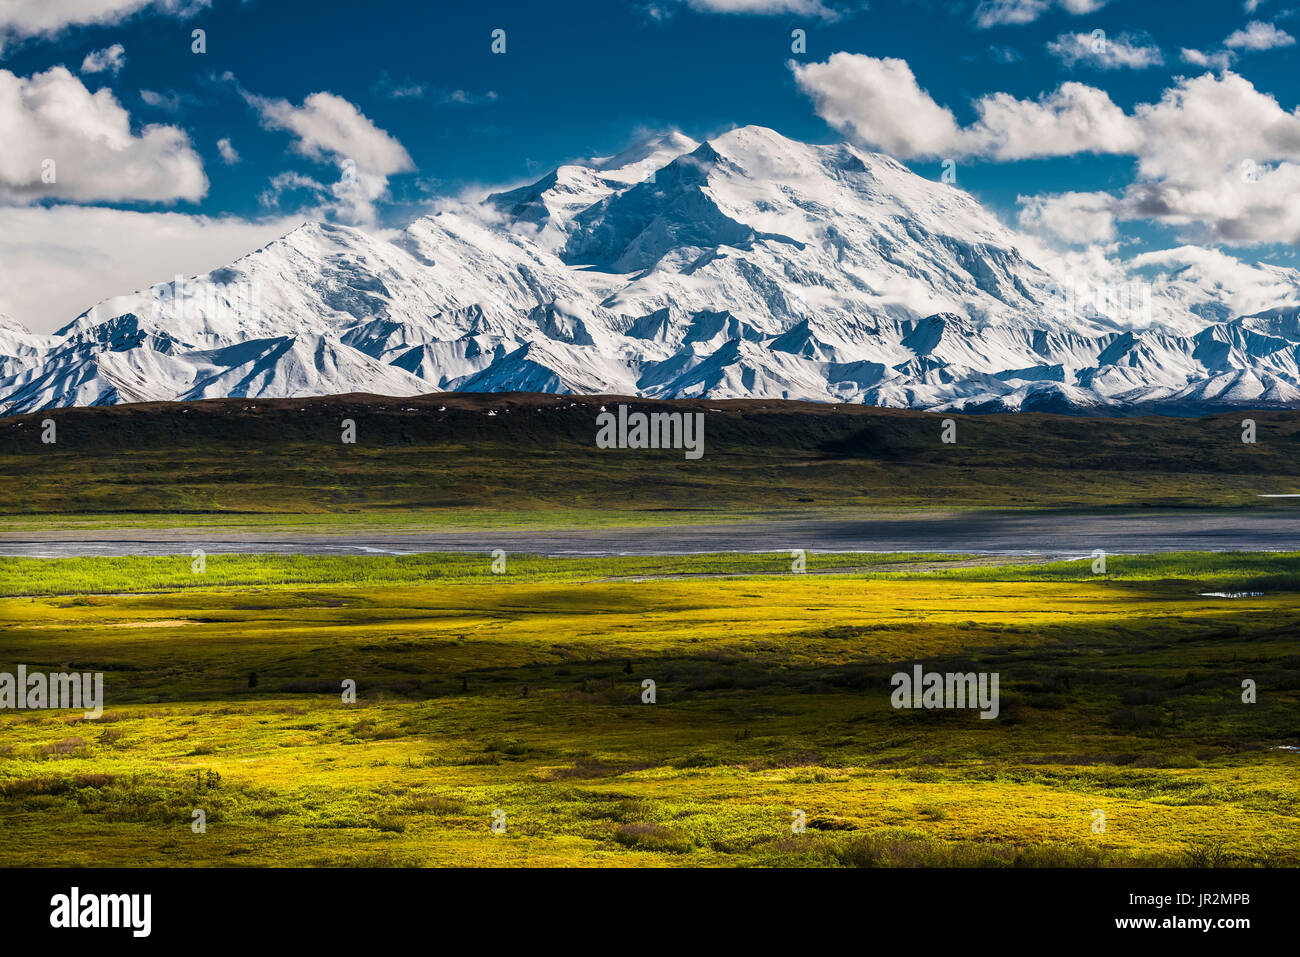 Scenic Summer View Of Denali And Vibrant Green Tundra In The Foreground, Interior Alaska, USA Stock Photo